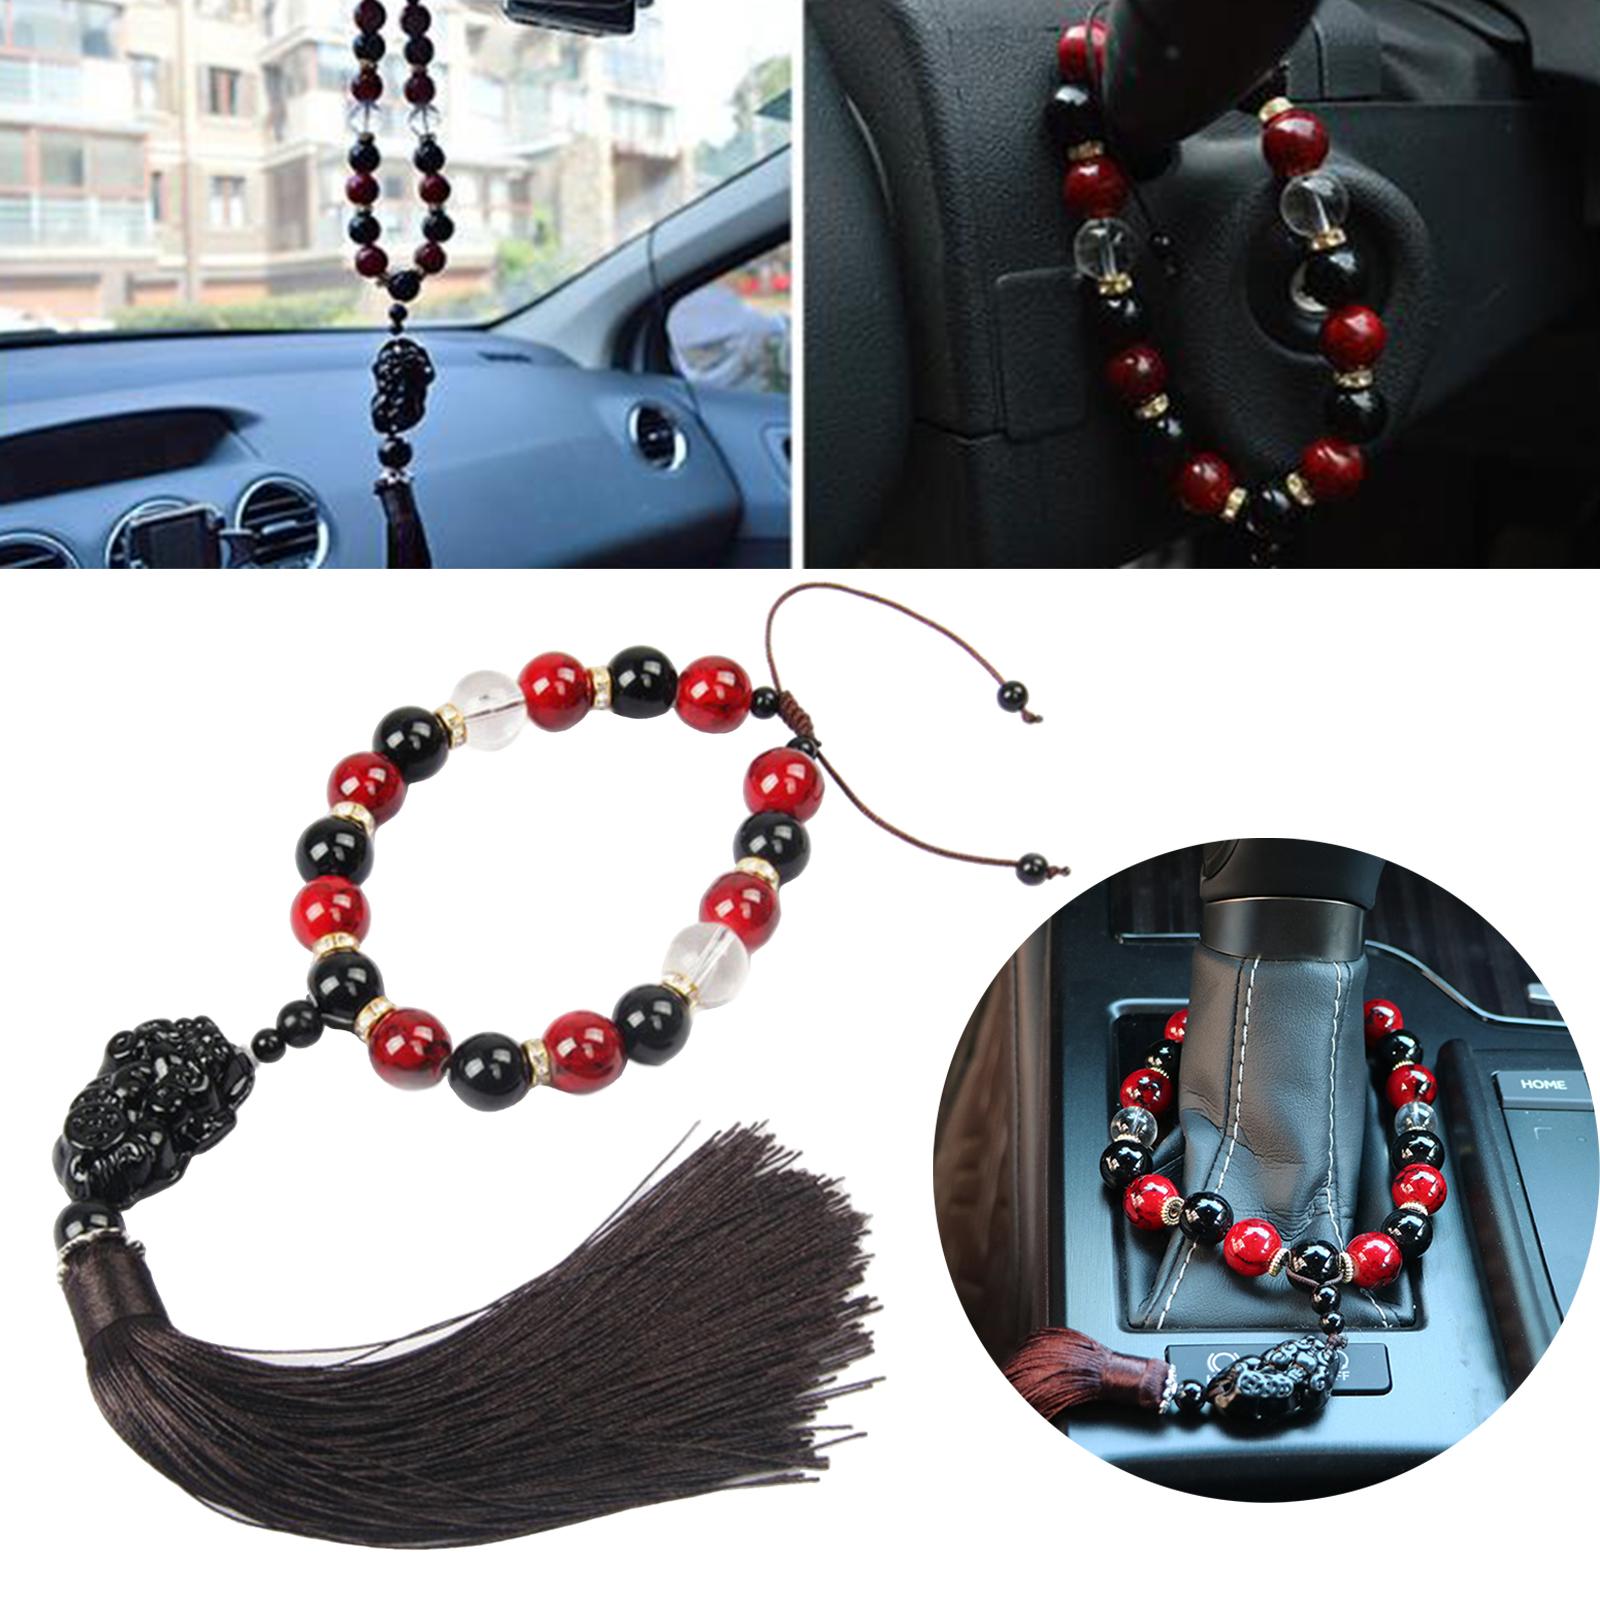 Car Rearview Mirror Rosary Hang On Mirror Rearview for Truck Car Bike